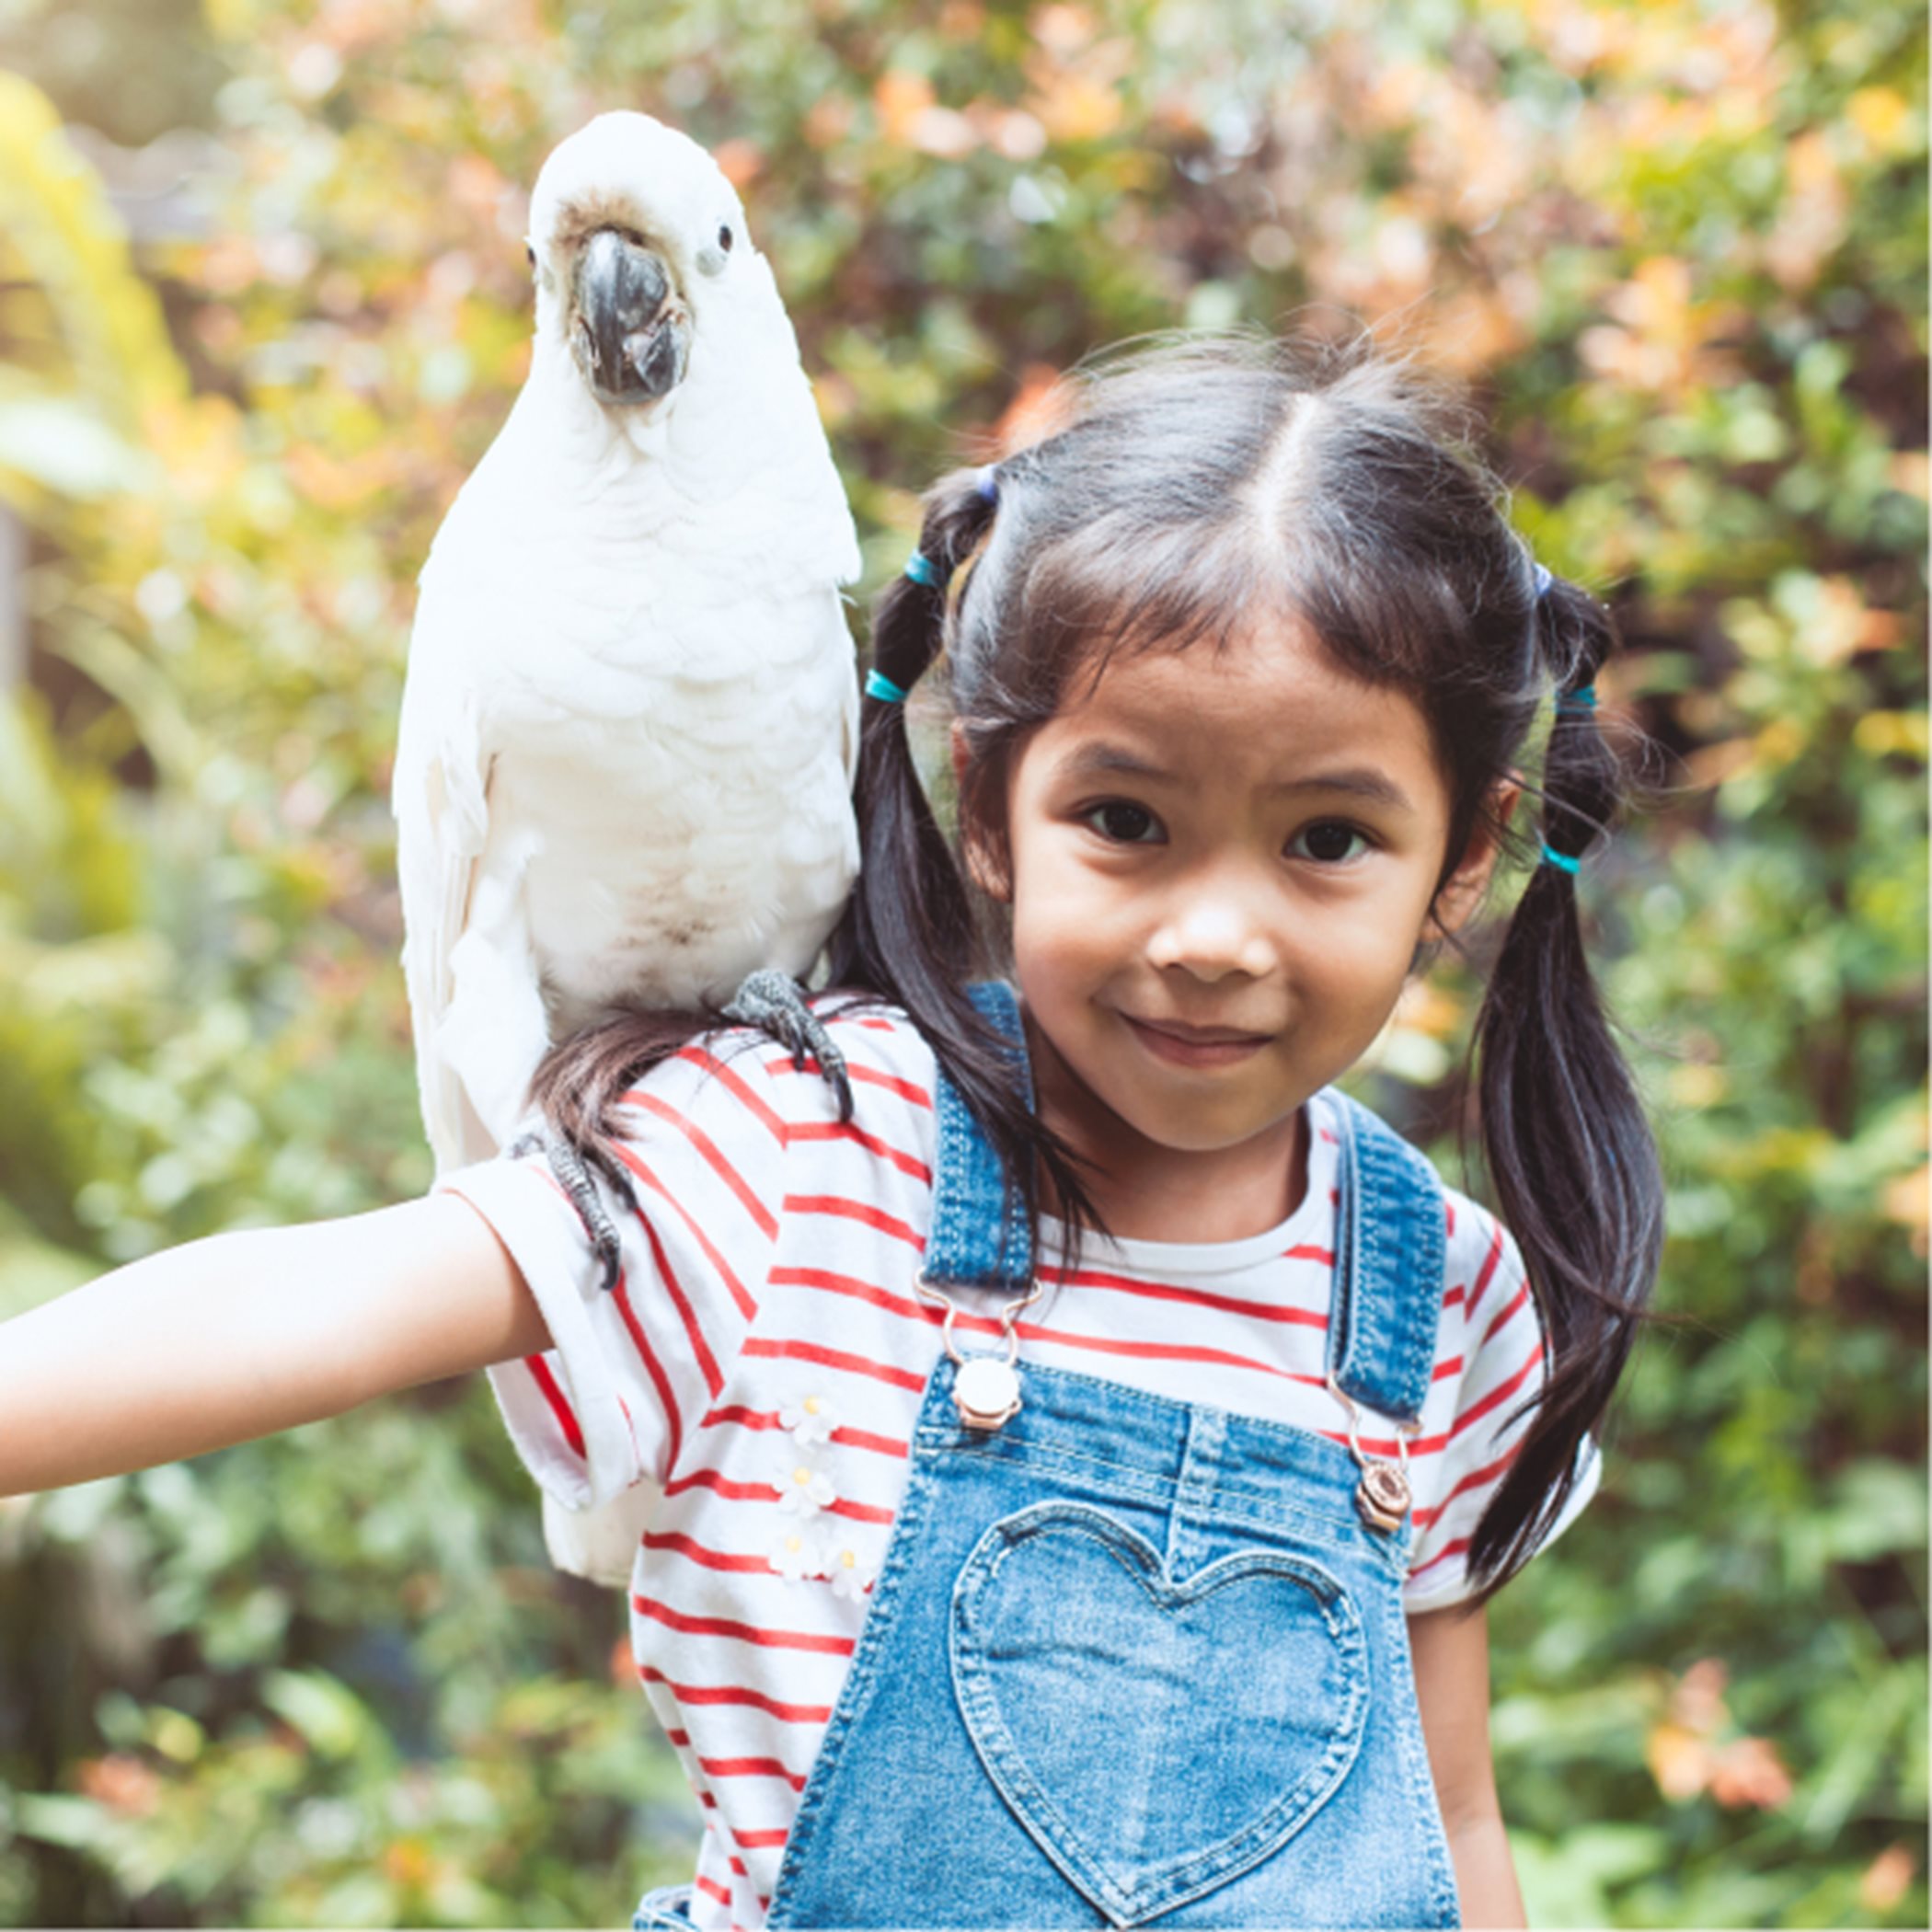 Girl with parrot at her shoulder